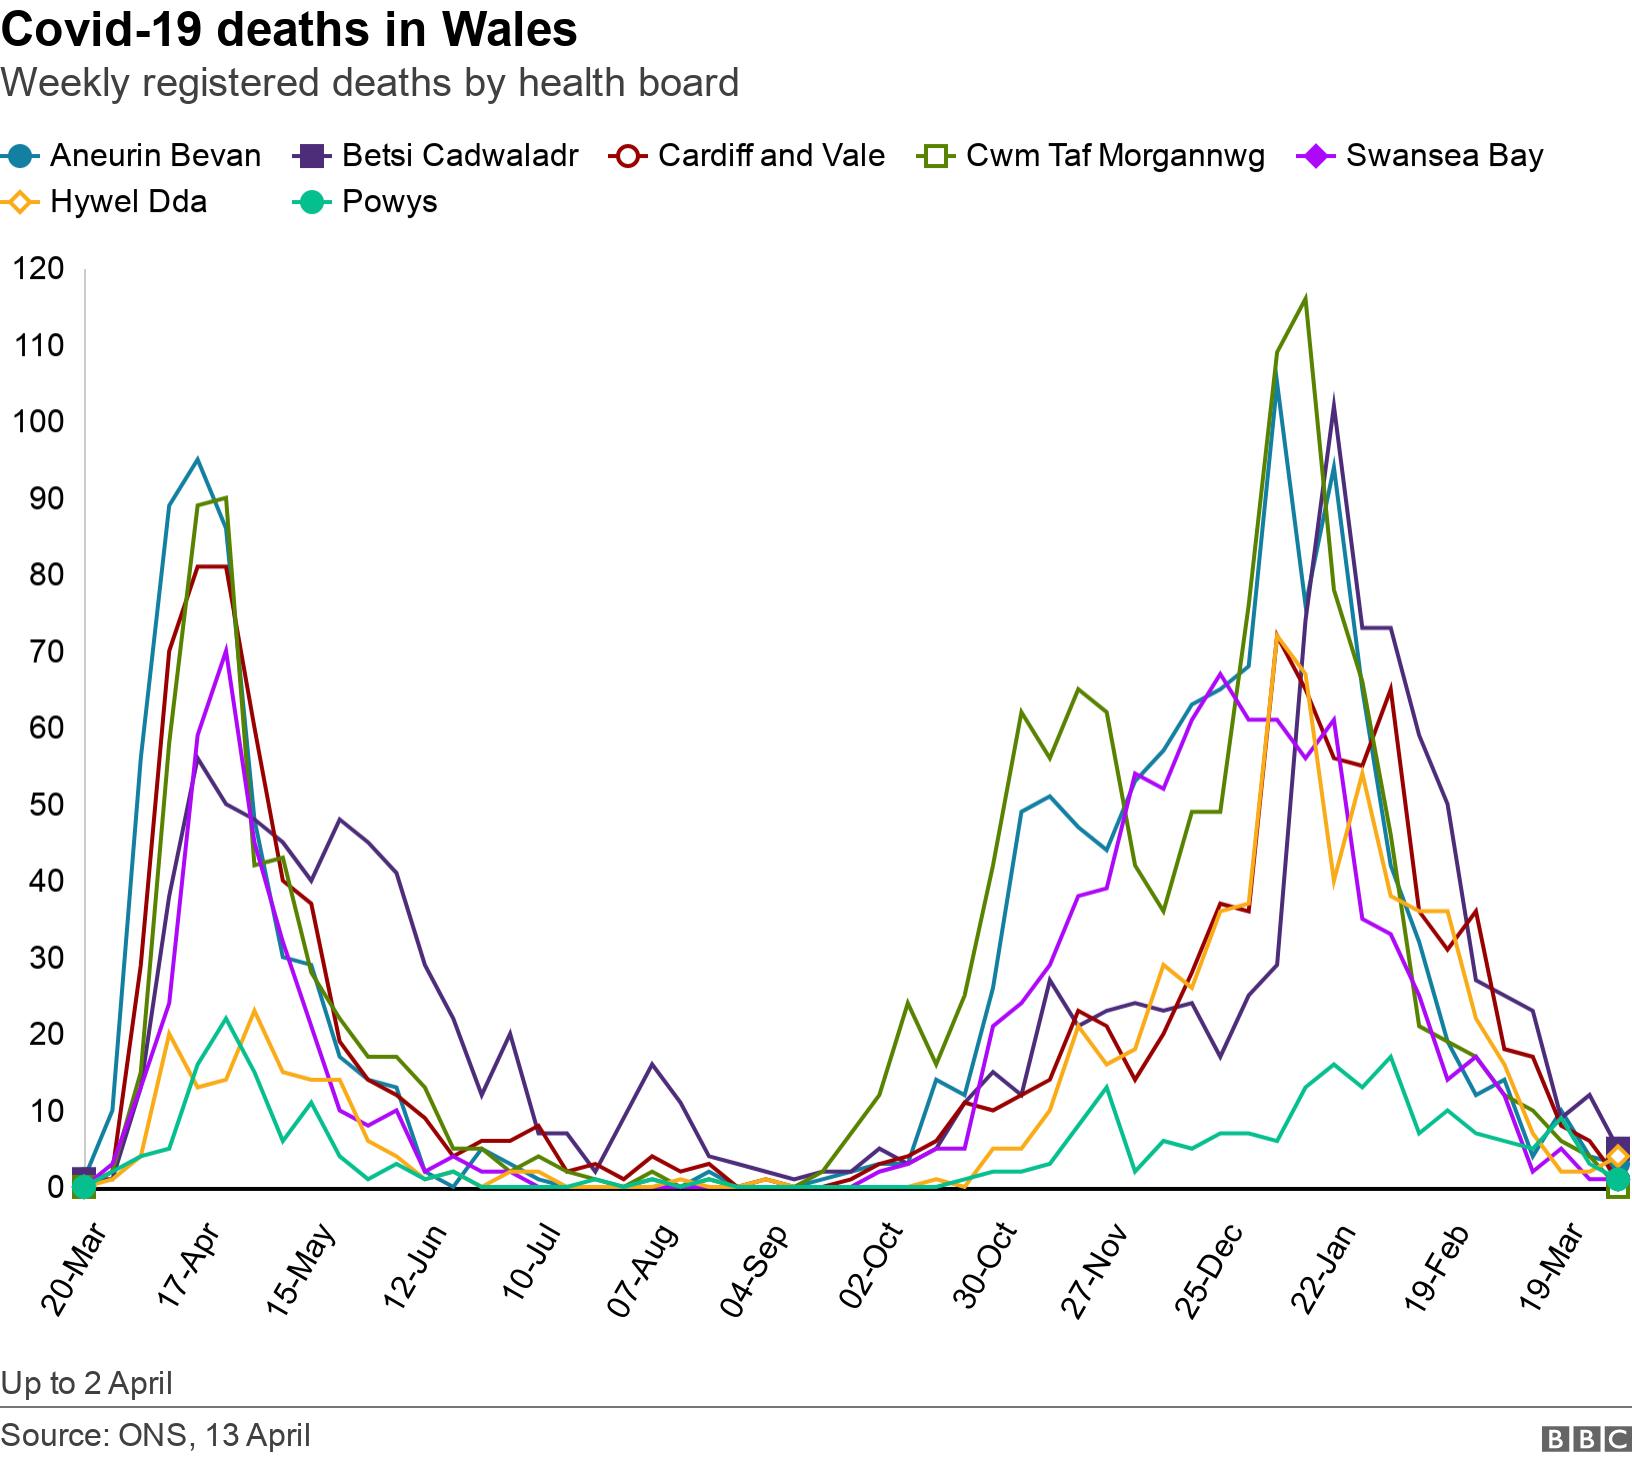 Covid-19 deaths in Wales. Weekly registered deaths by health board.  Up to 2 April.